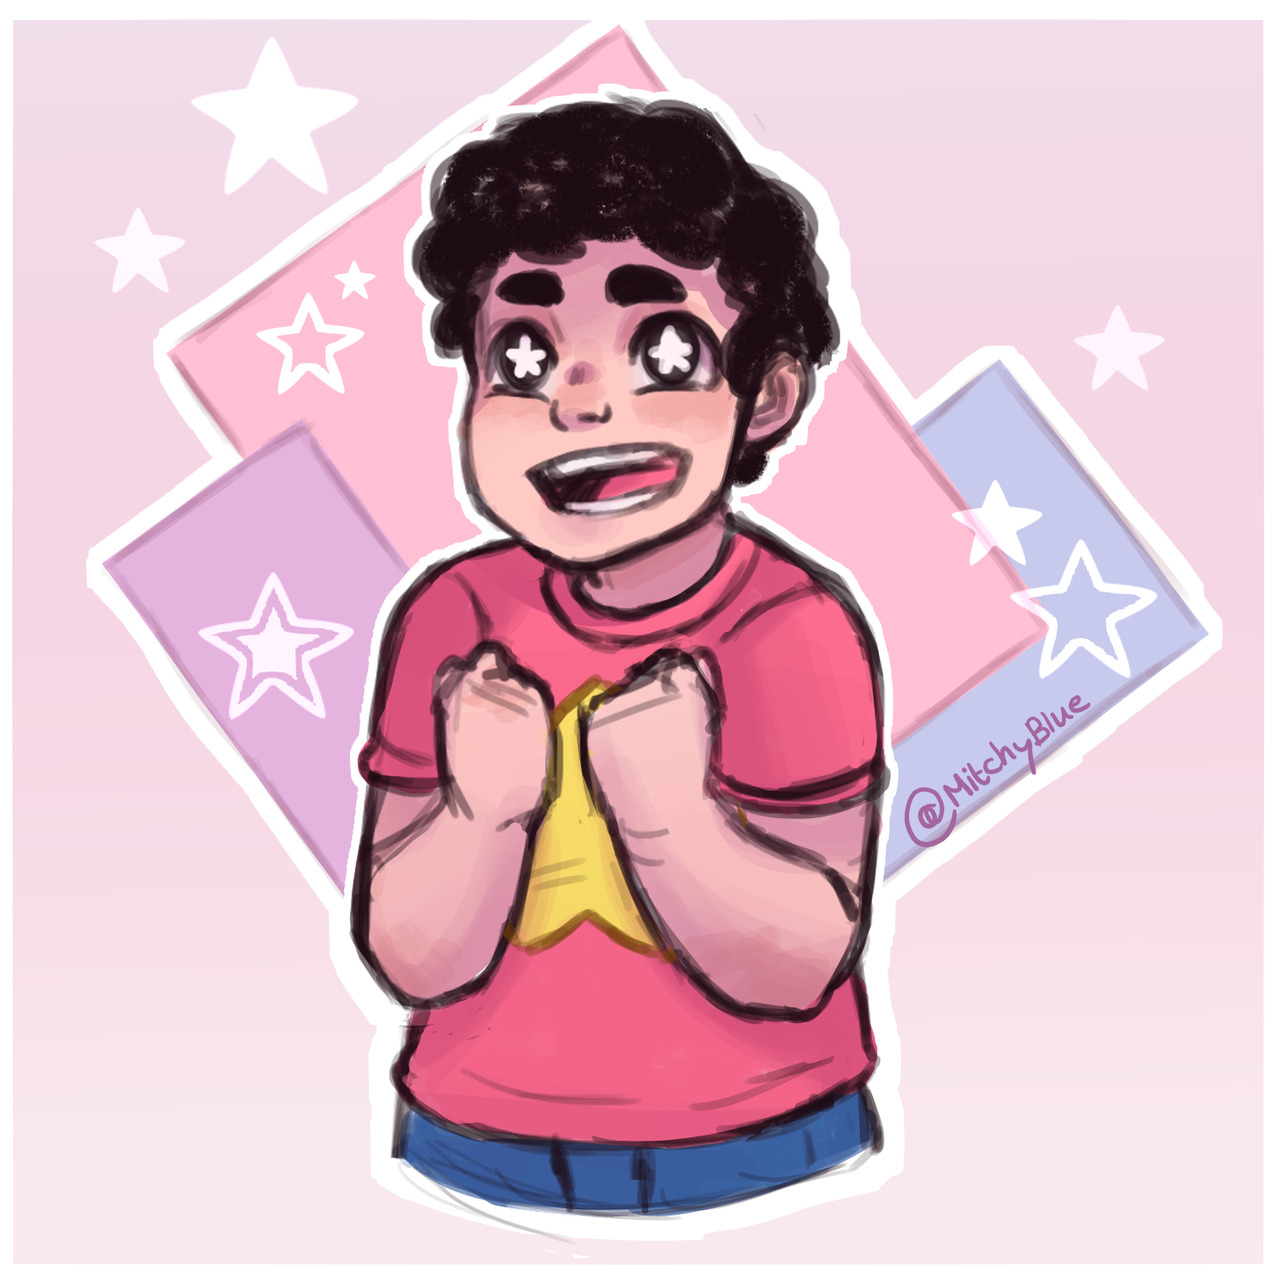 Tiny Steven cause he and his happy face need to be protected ;A;